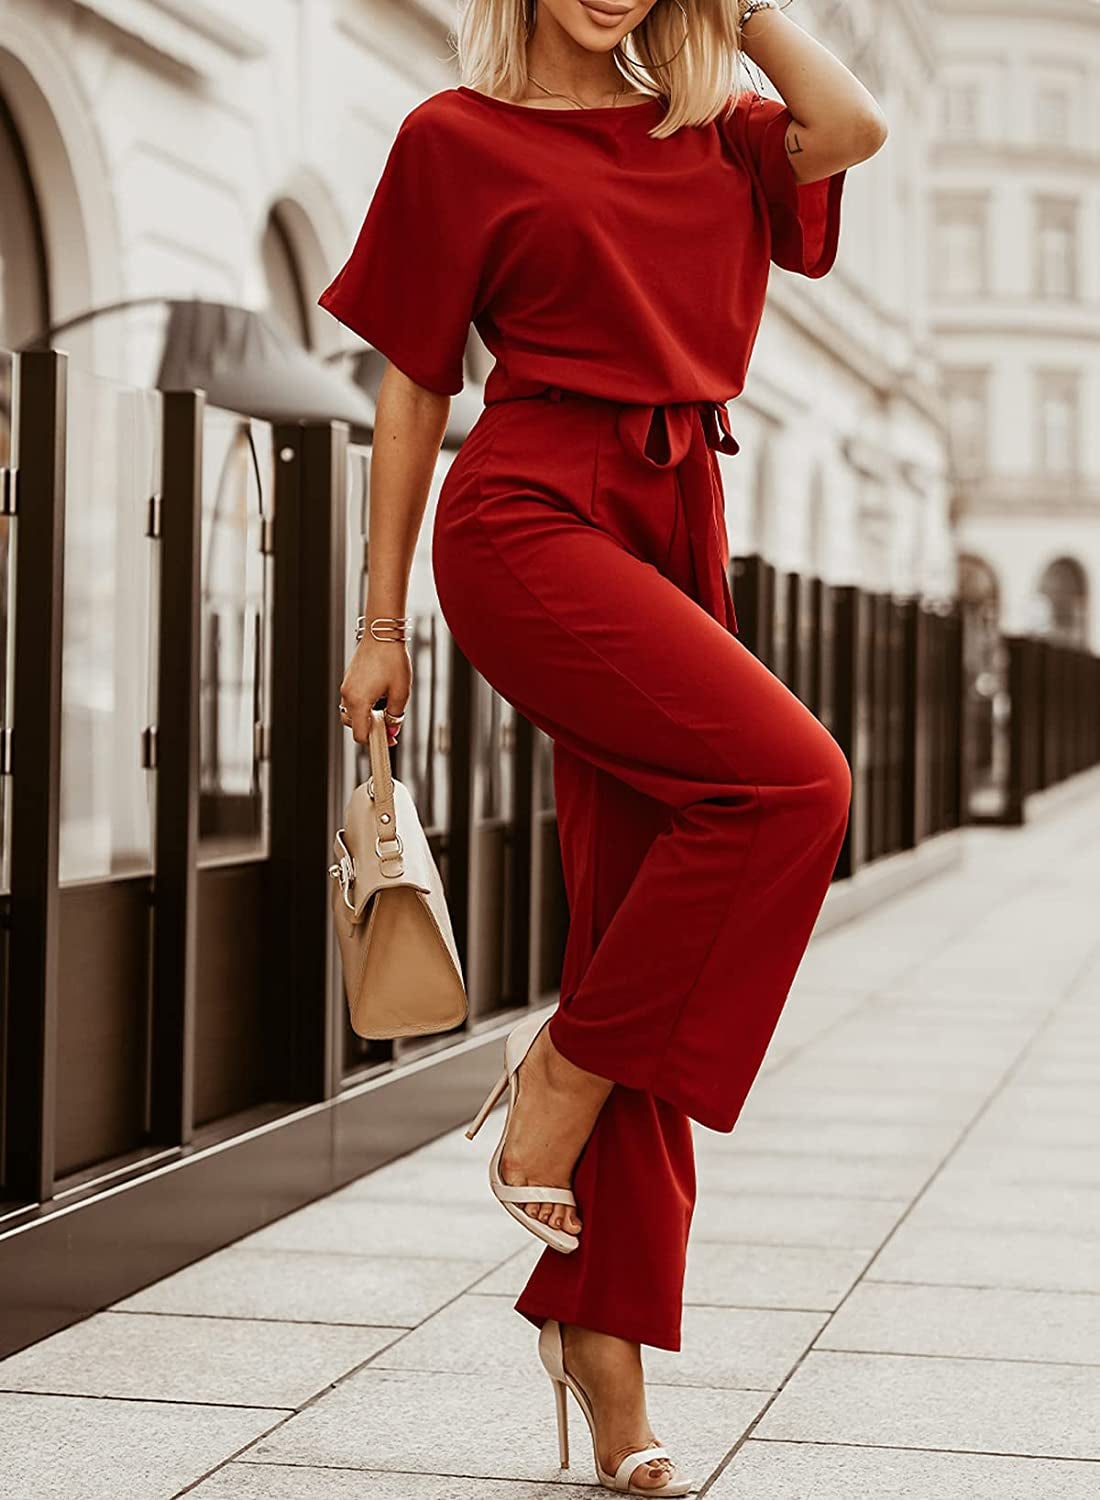 30 Cute Jumpsuits For Anyone Who Wants To Look Put-Together By Putting In The Least Amount Of Effort